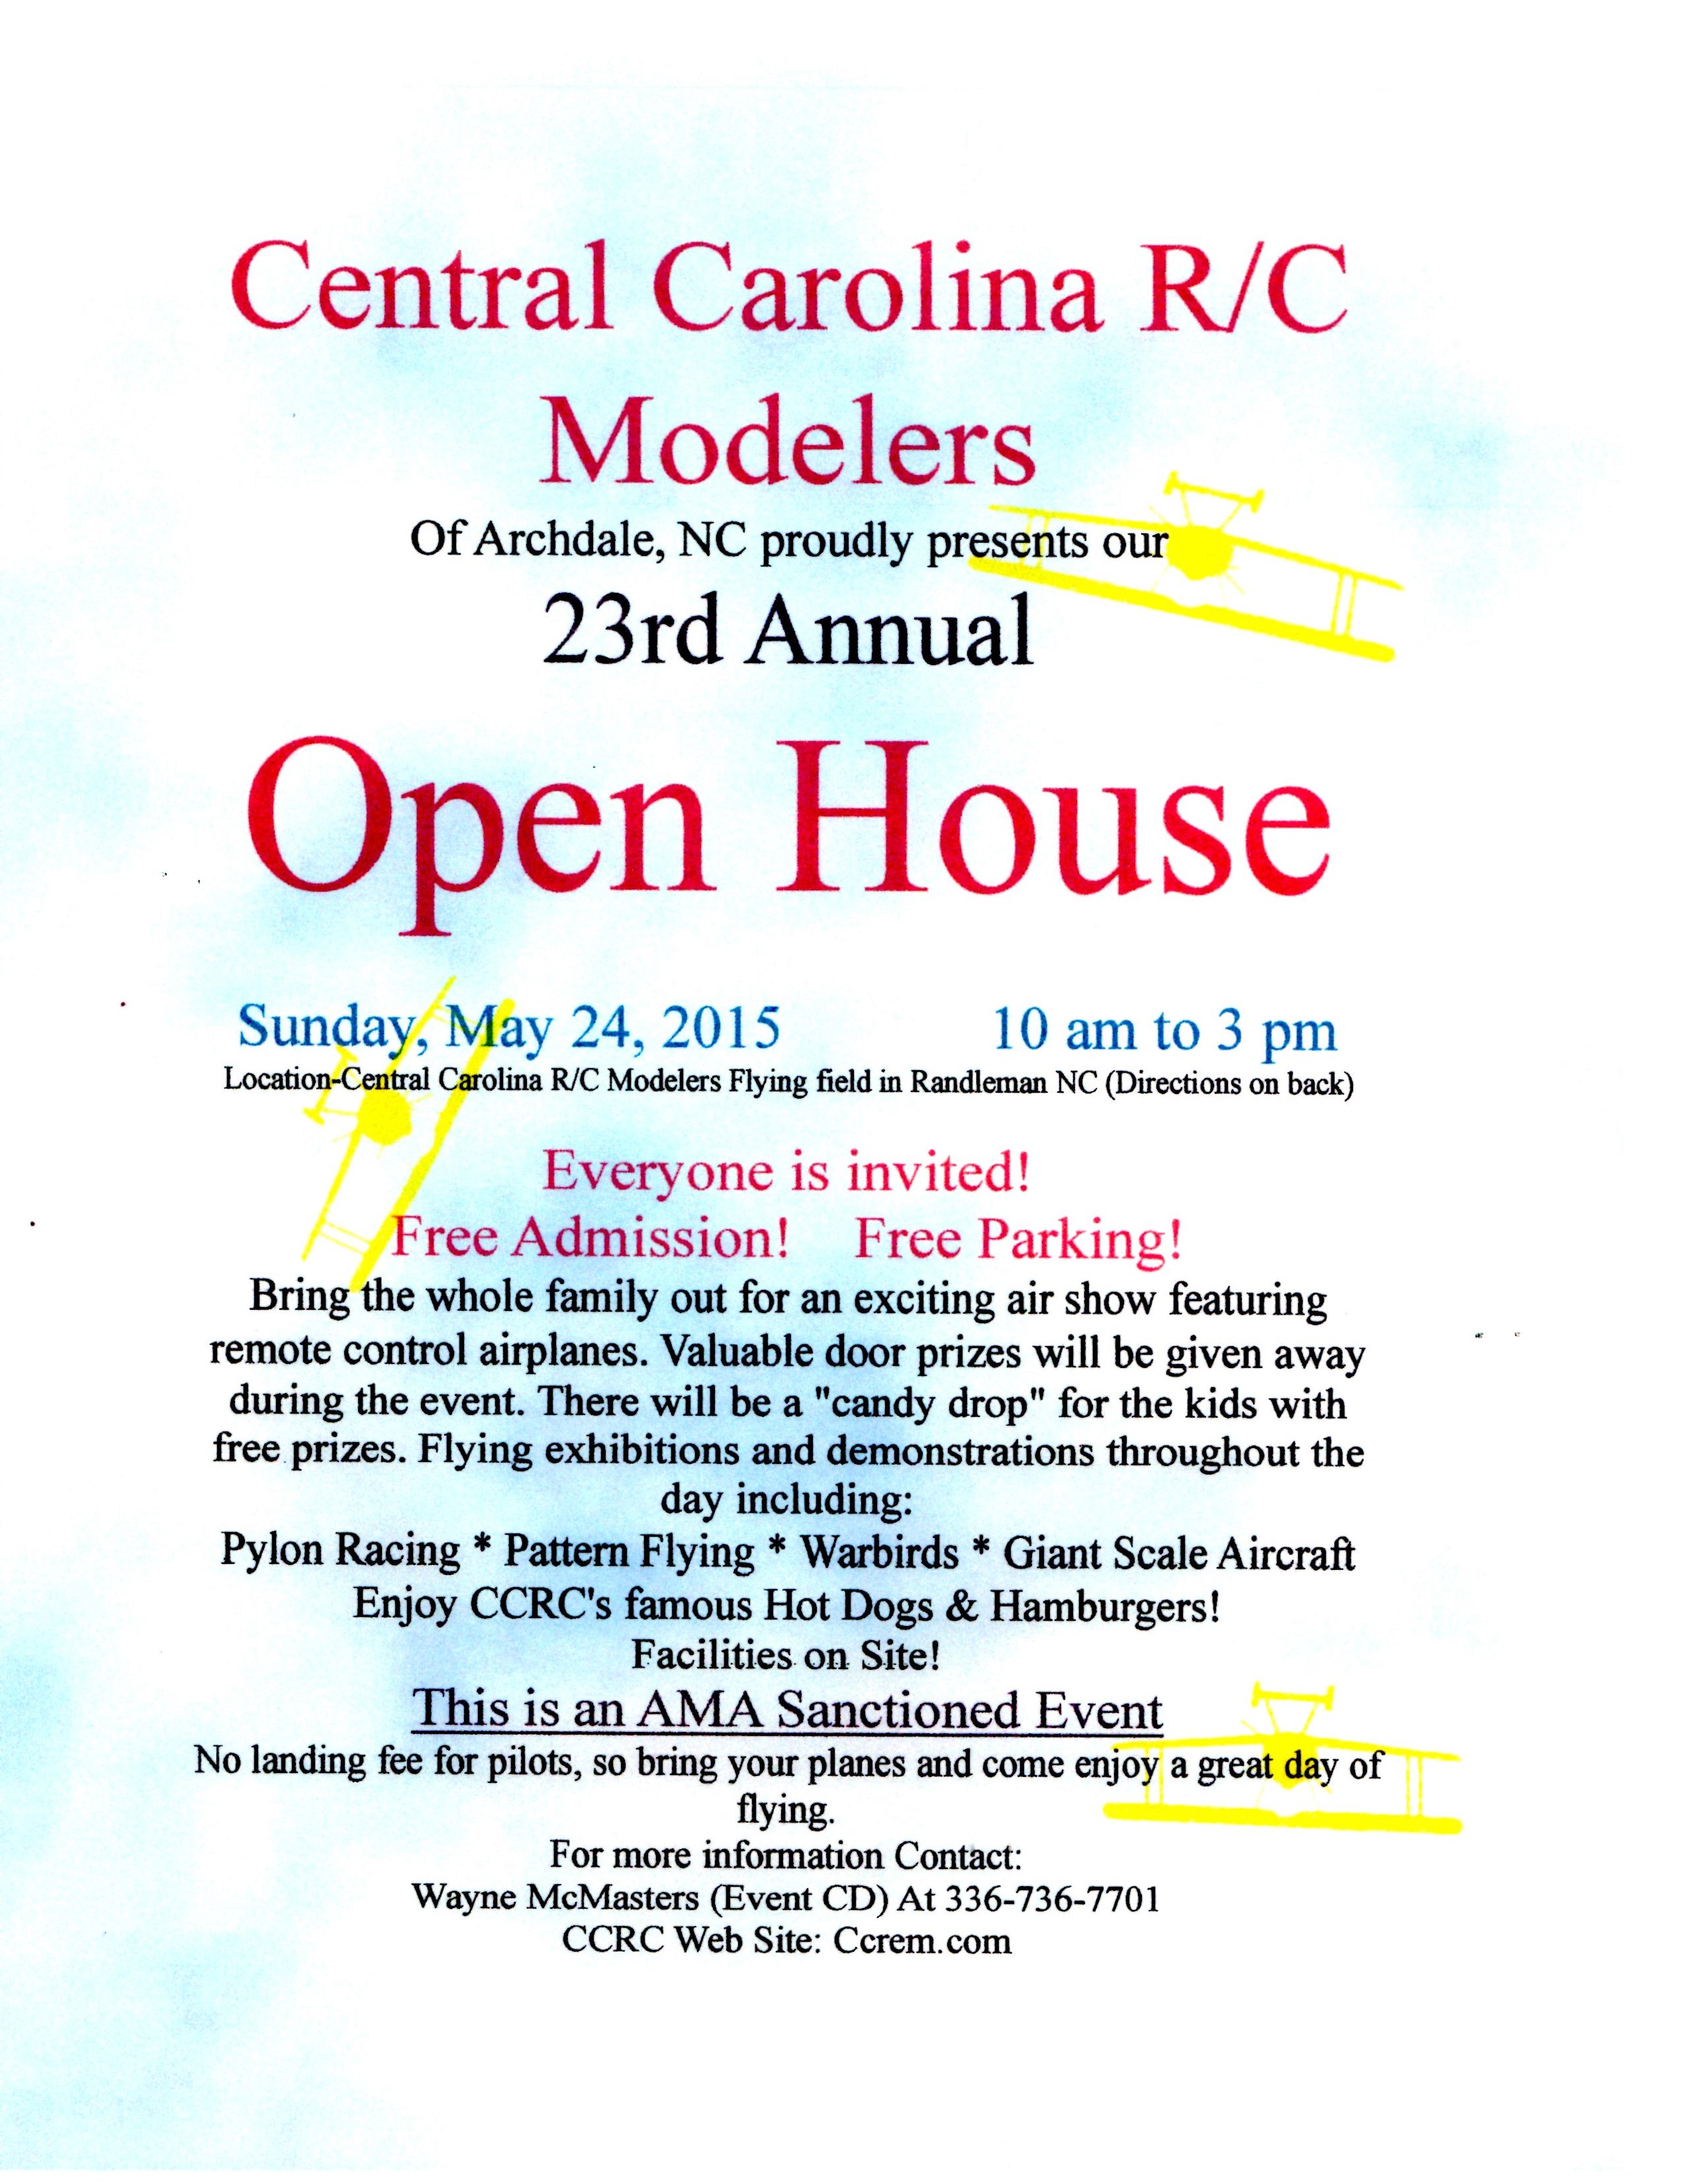 23rd Annual Central Carolina RC Open House